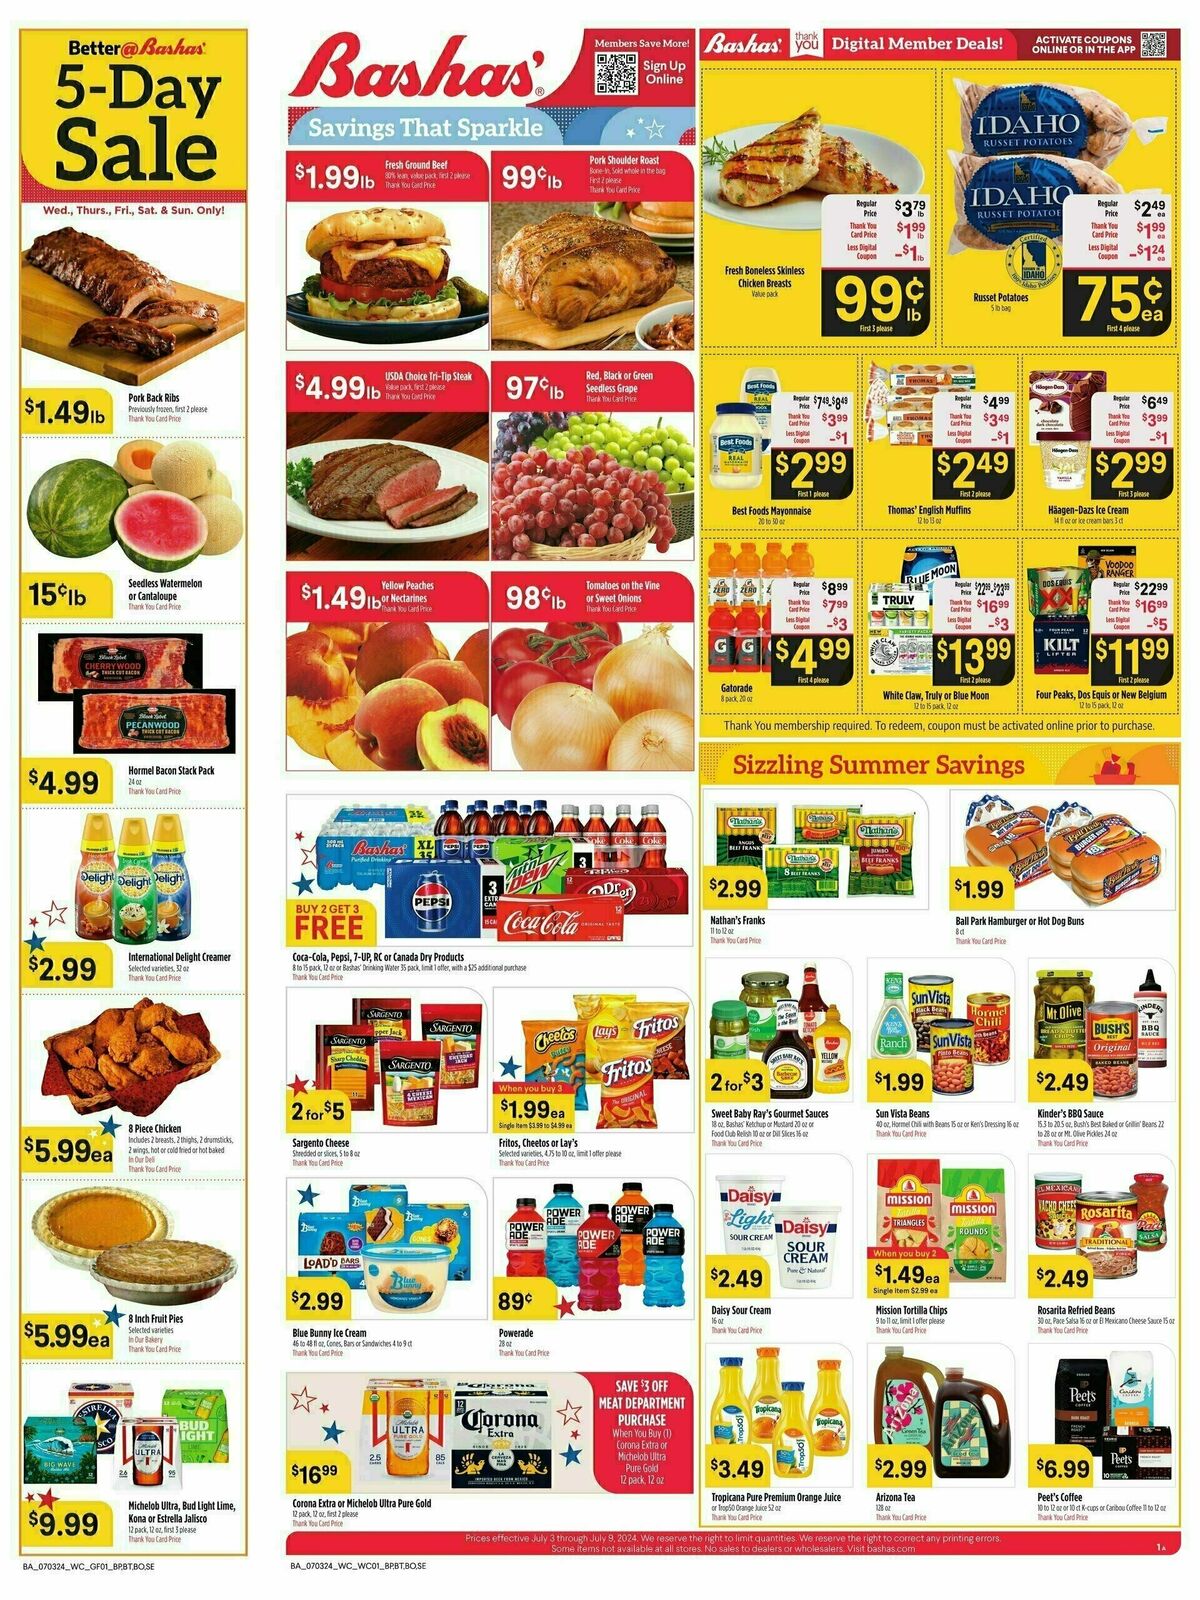 Bashas Weekly Ad from July 3